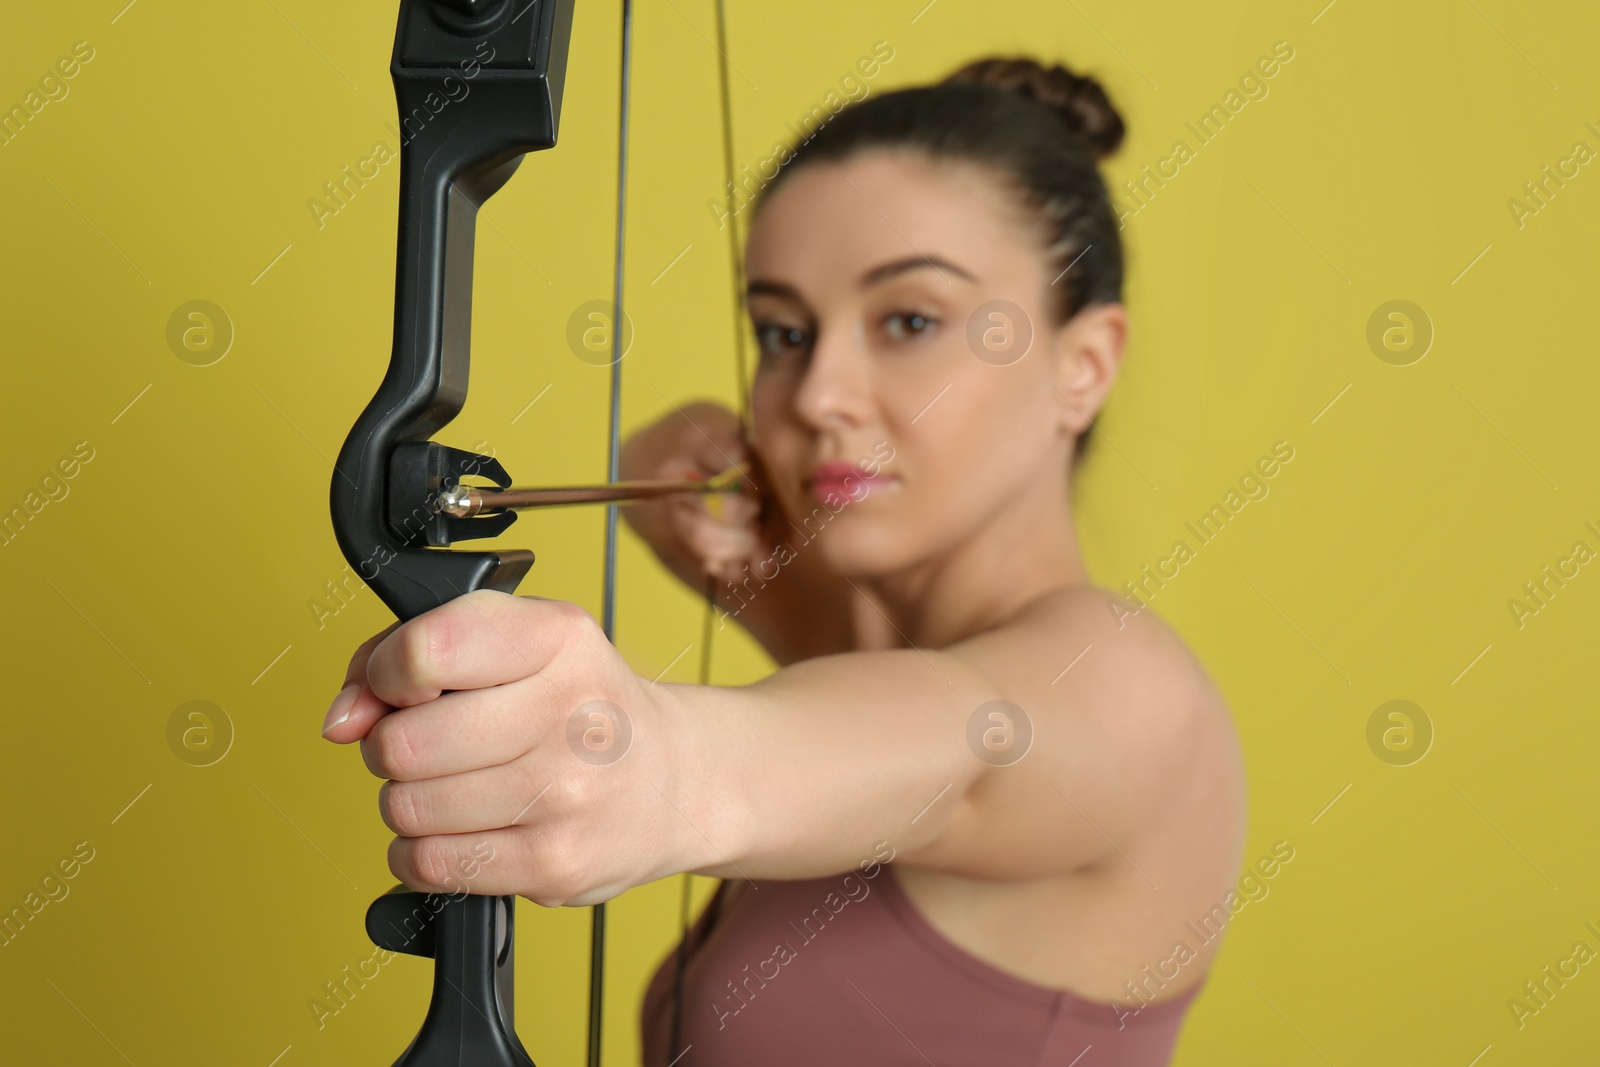 Photo of Woman with bow and arrow practicing archery against yellow background, focus on hand